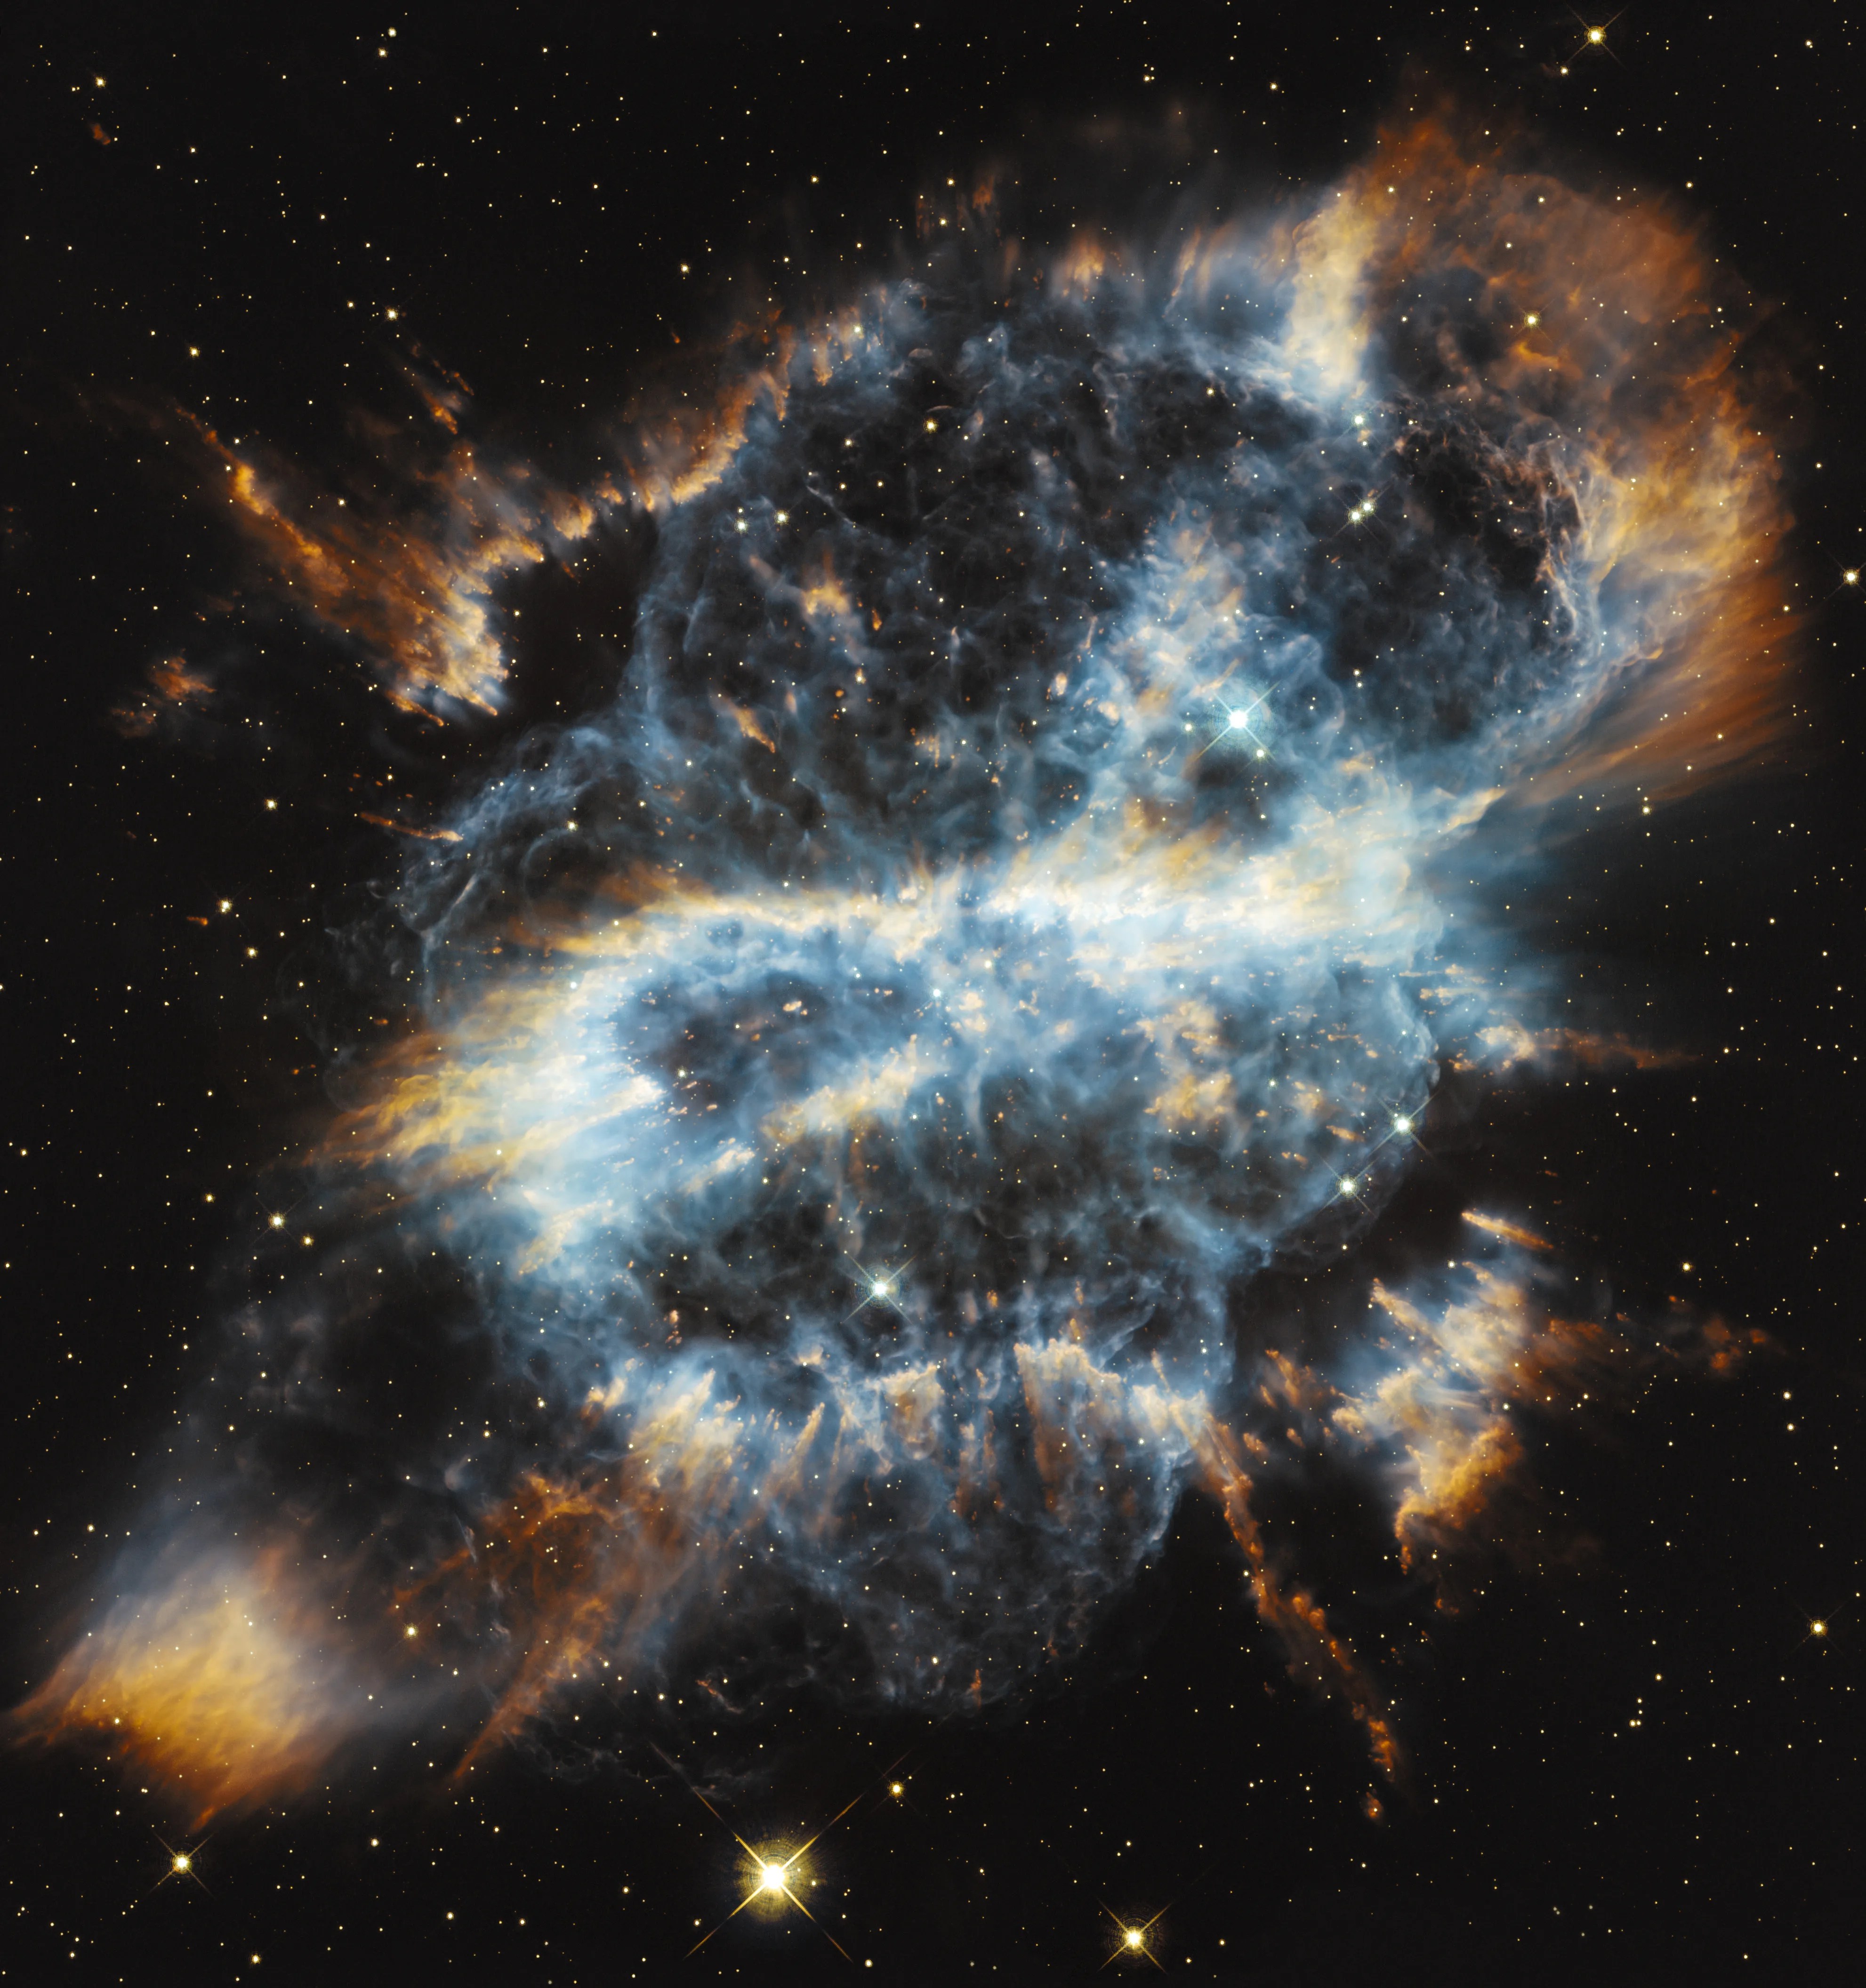 A Cosmic Holiday Ornament, Hubble Style